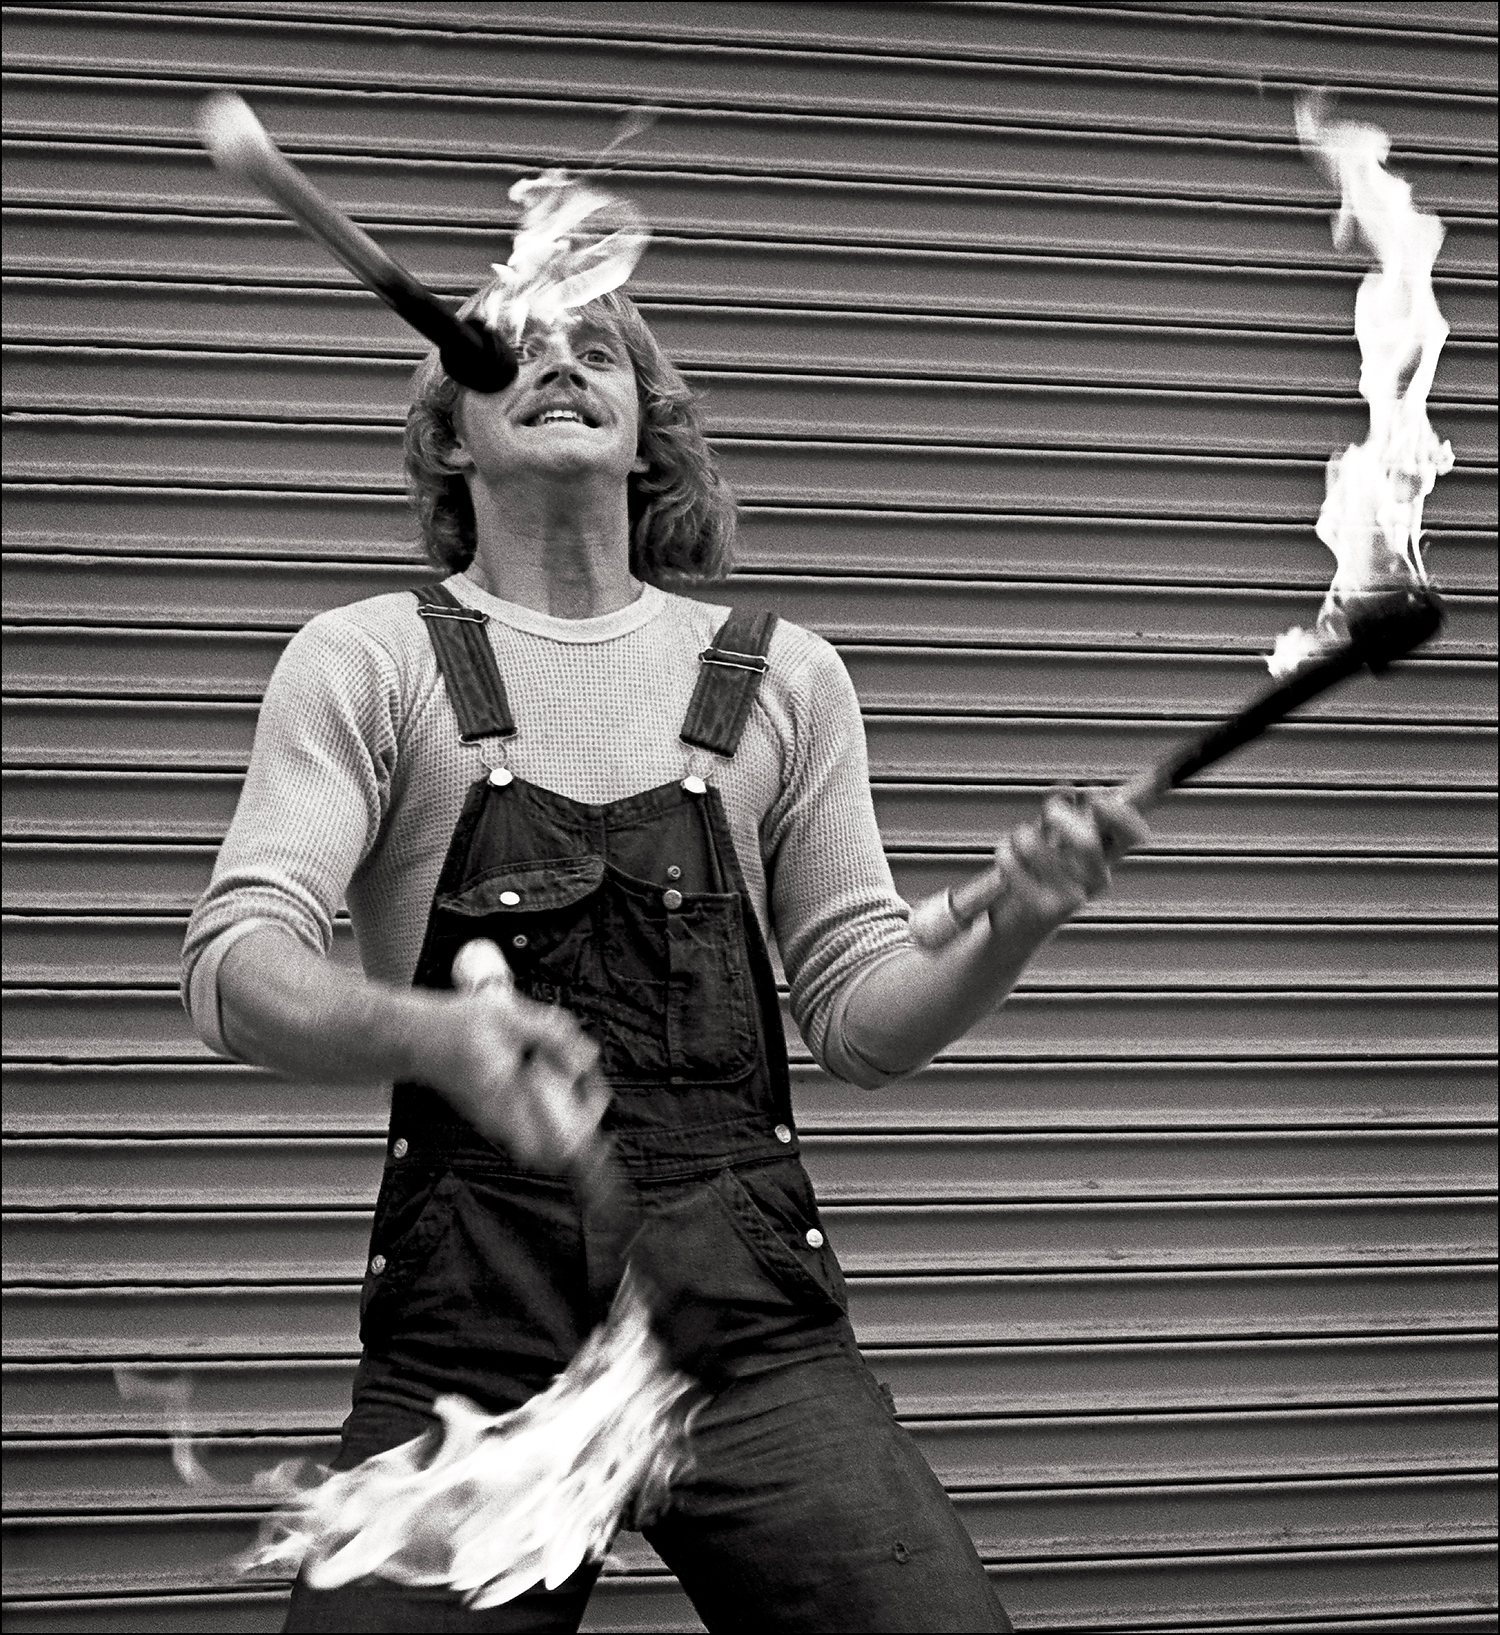 Playing With Fire, San Francisco, 1981